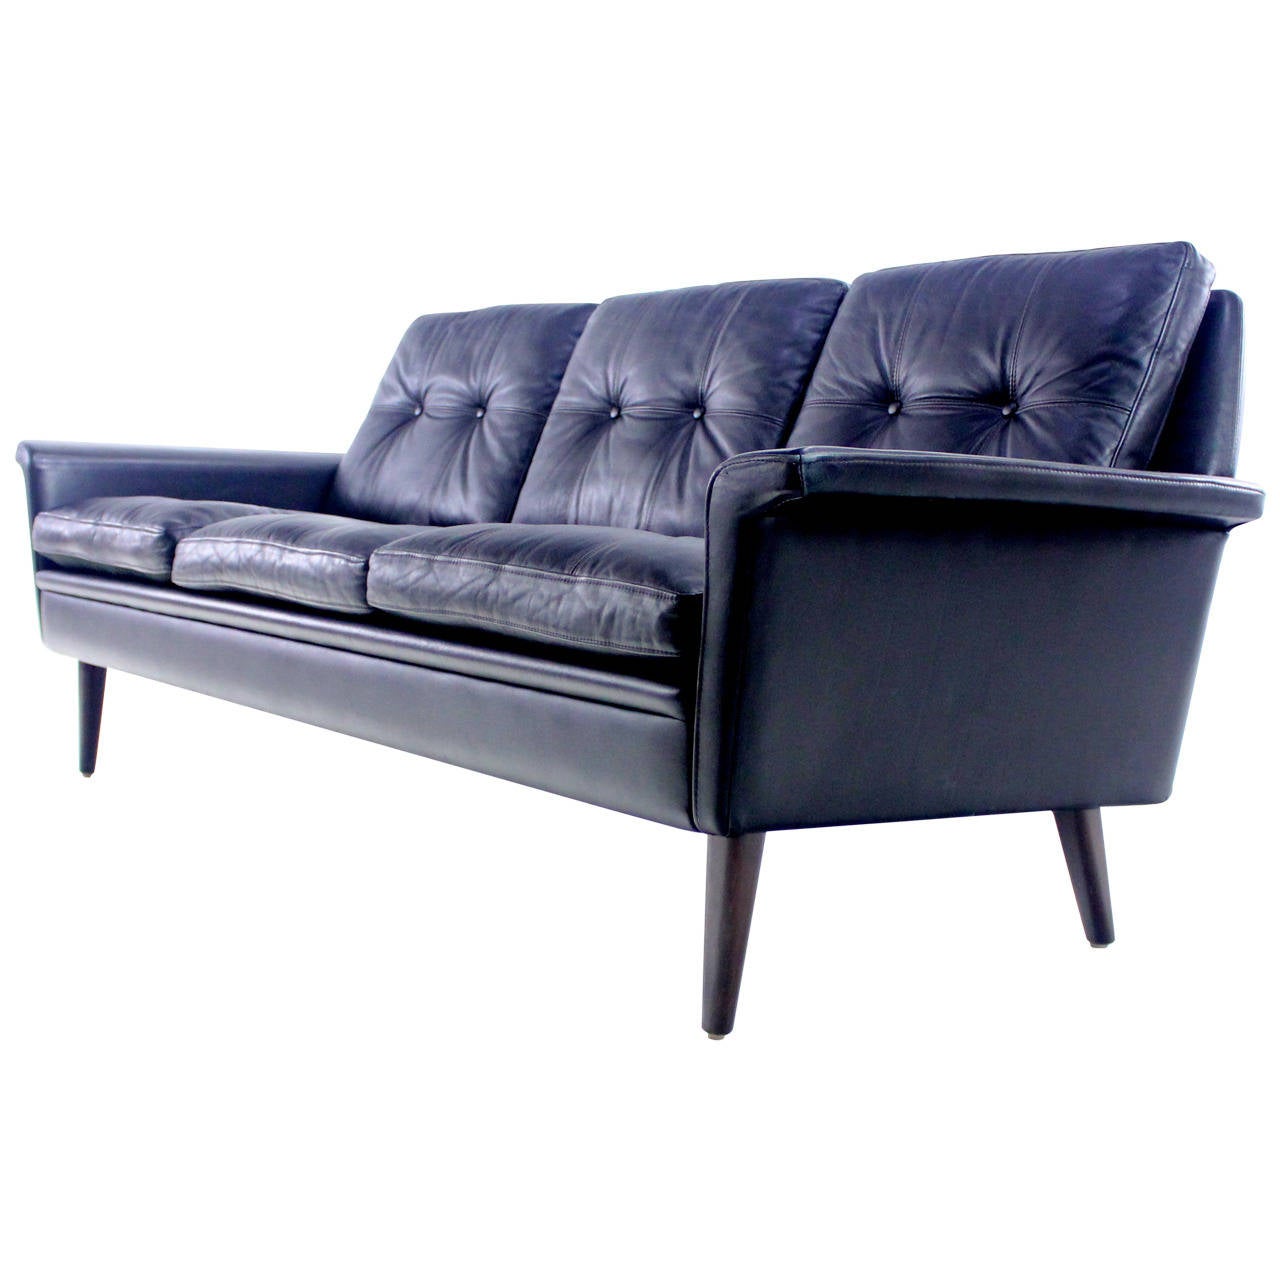 Luxe Danish Modern Black Leather Sofa For Sale